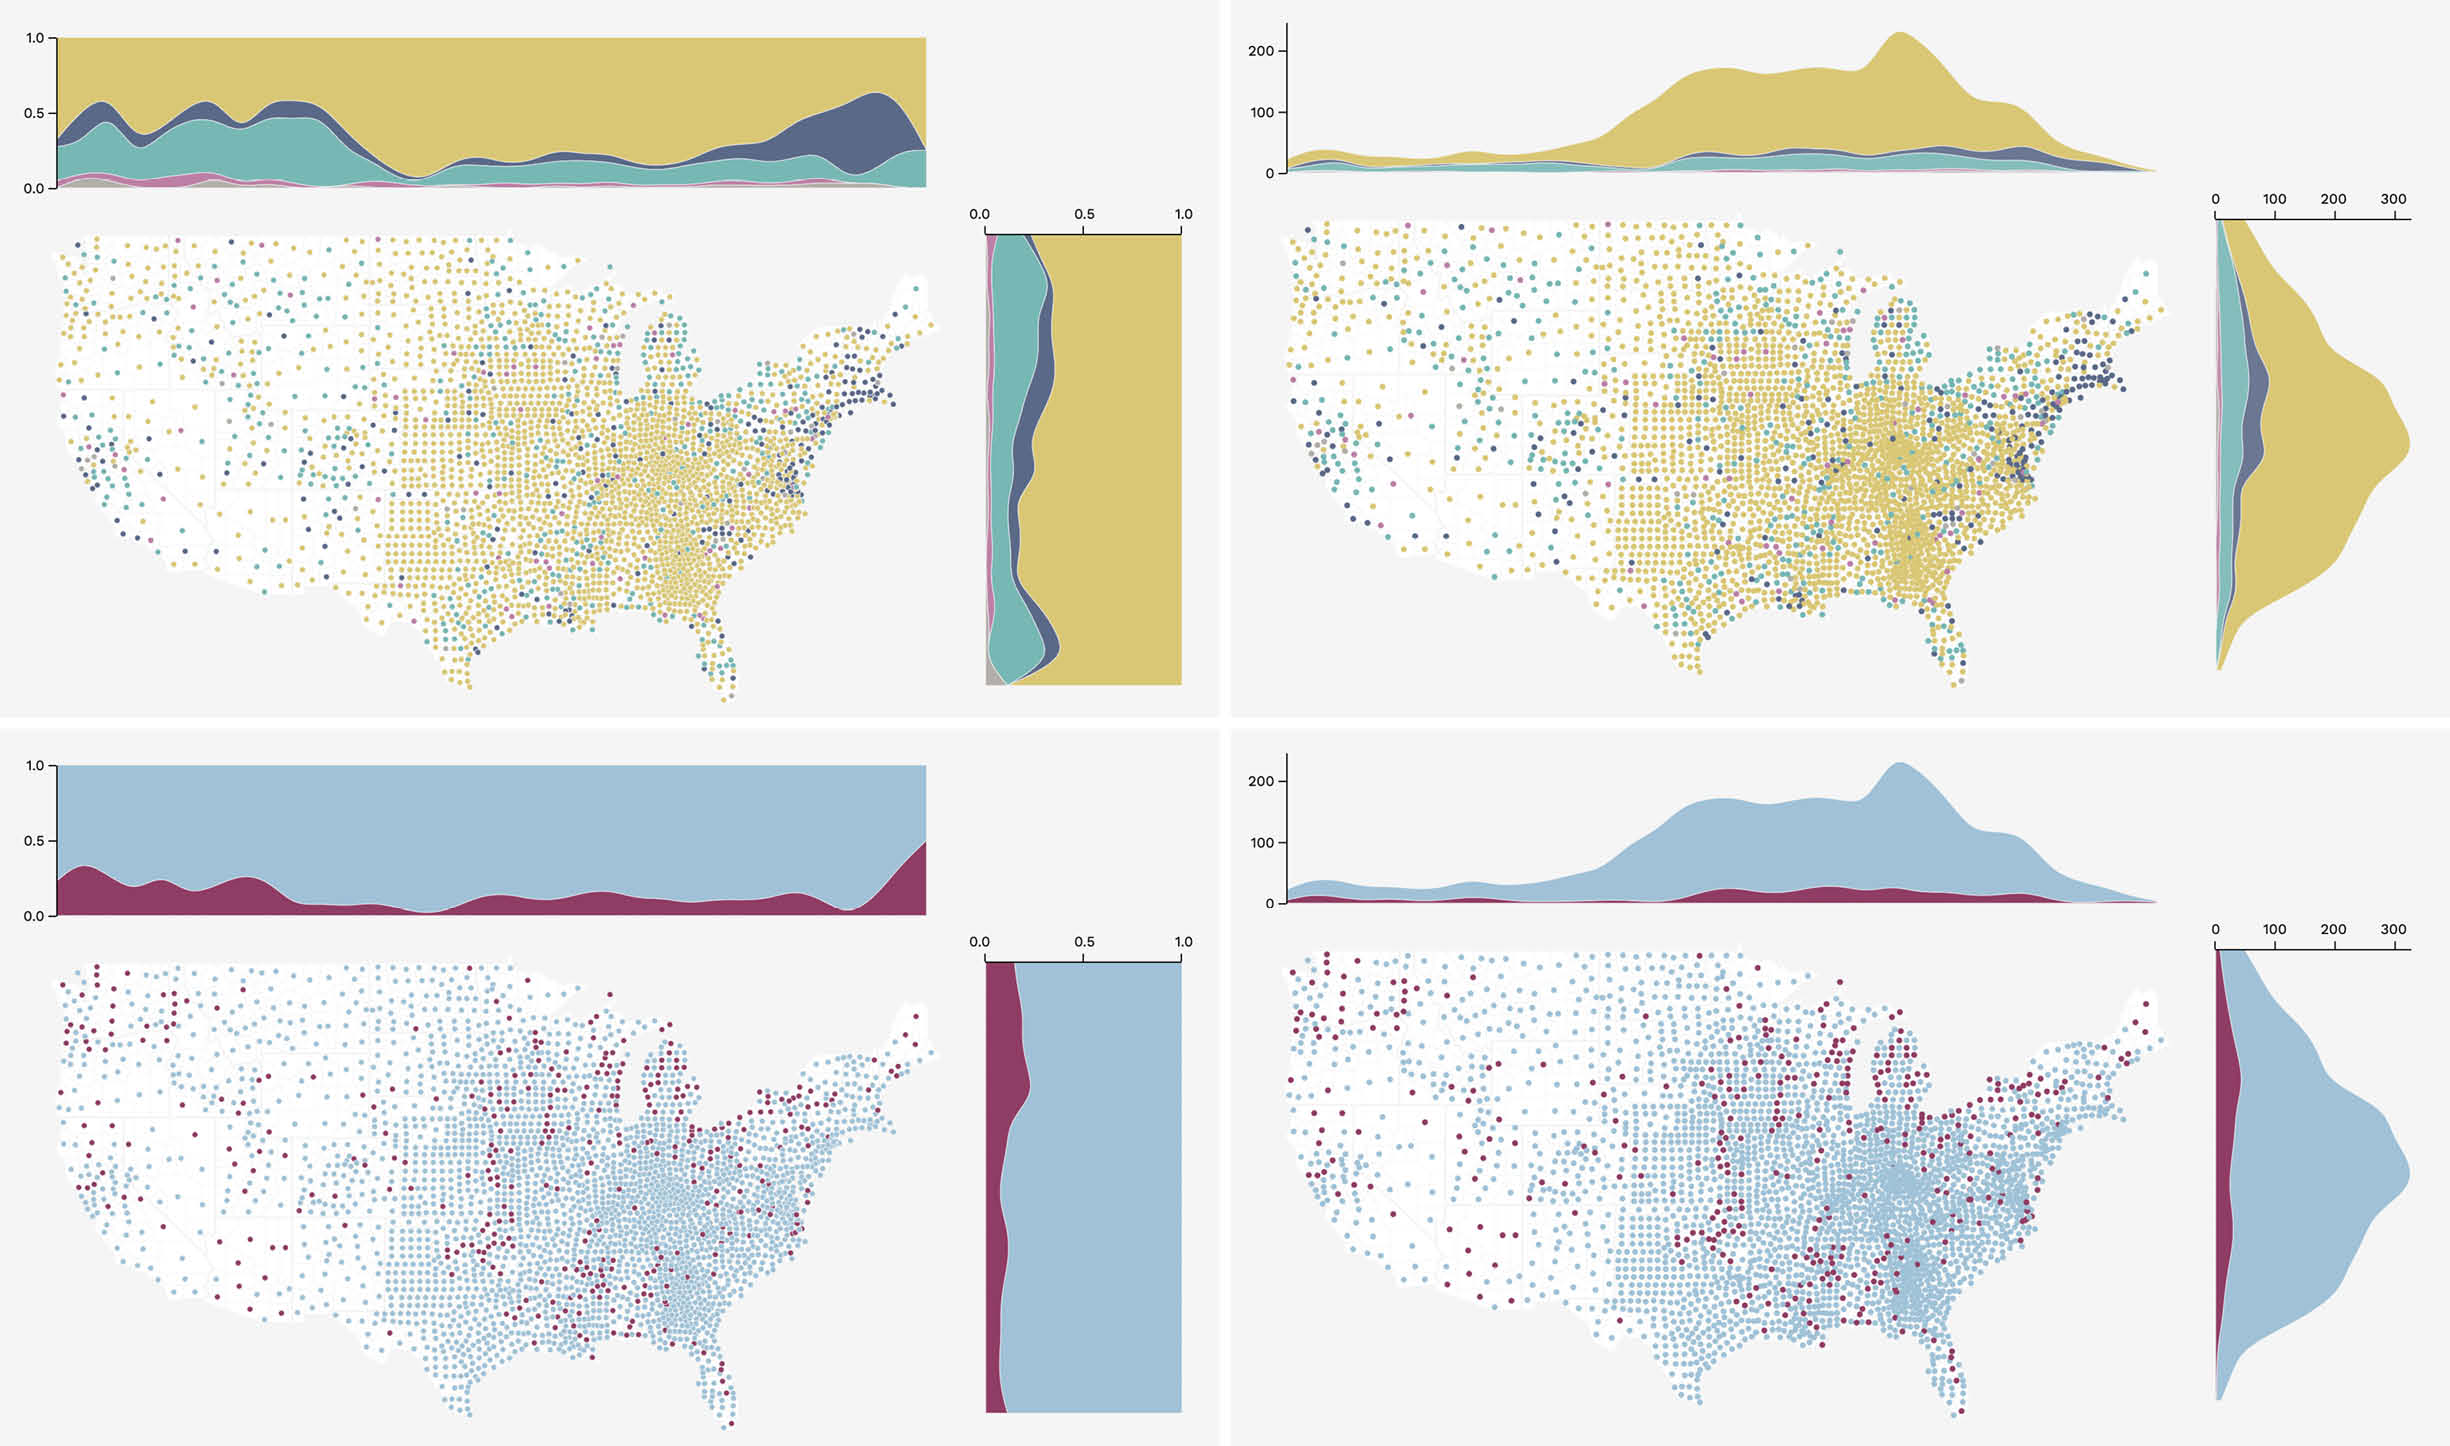 Four of the same geomap layouts slicing the dataset differently.